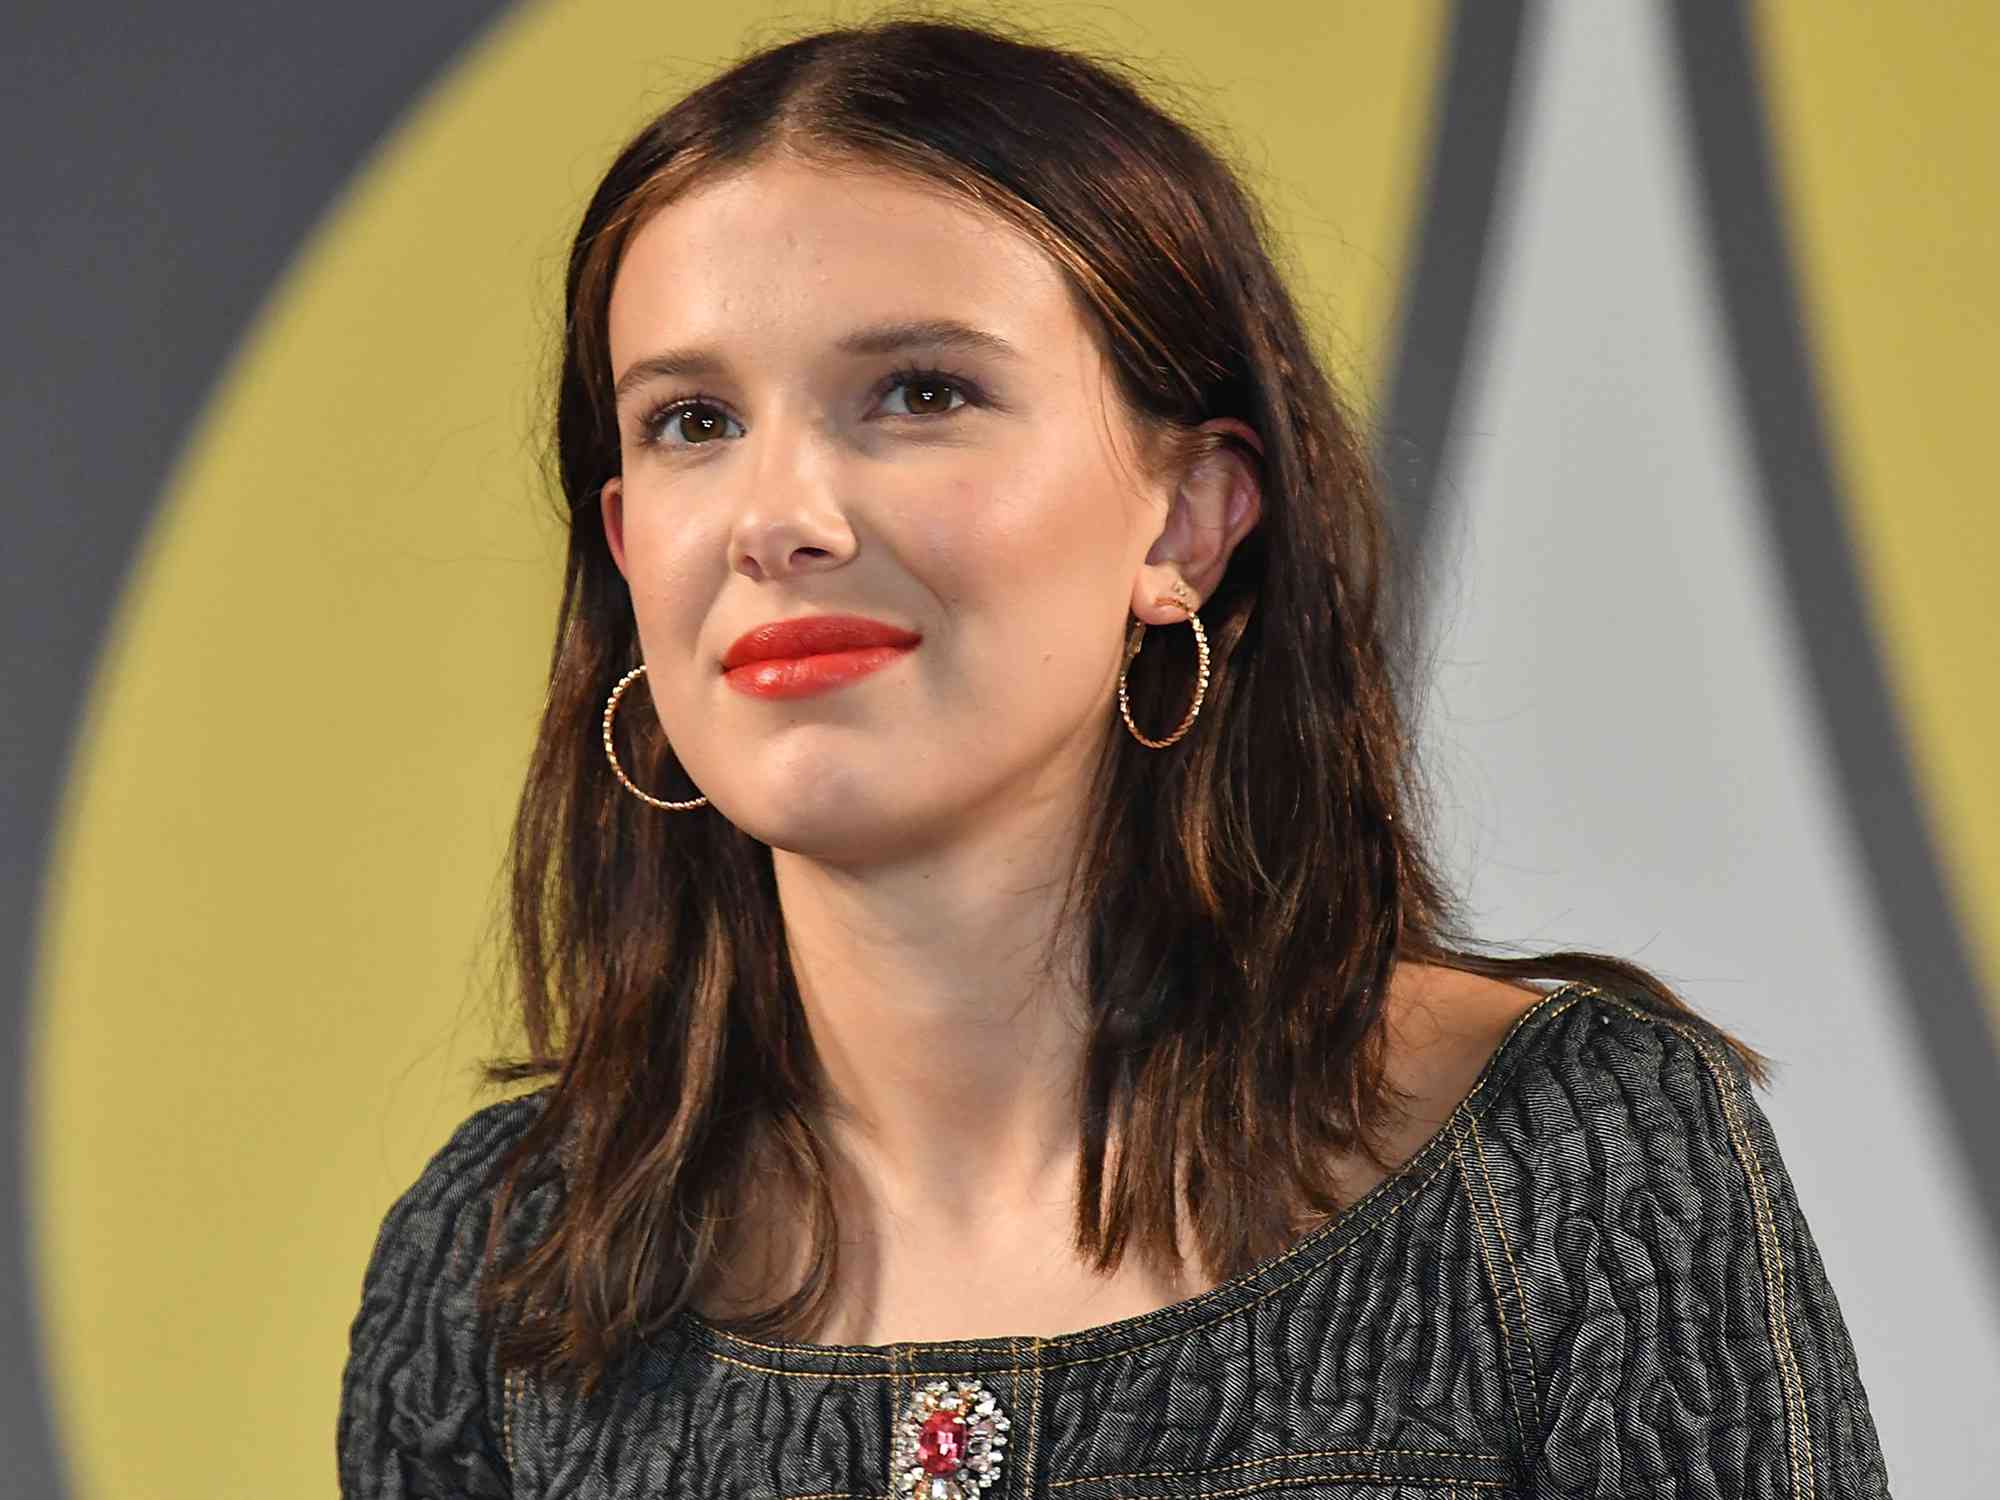 Millie Bobby Brown speaks during the celebrity talk event at Osaka Comic Con 2023